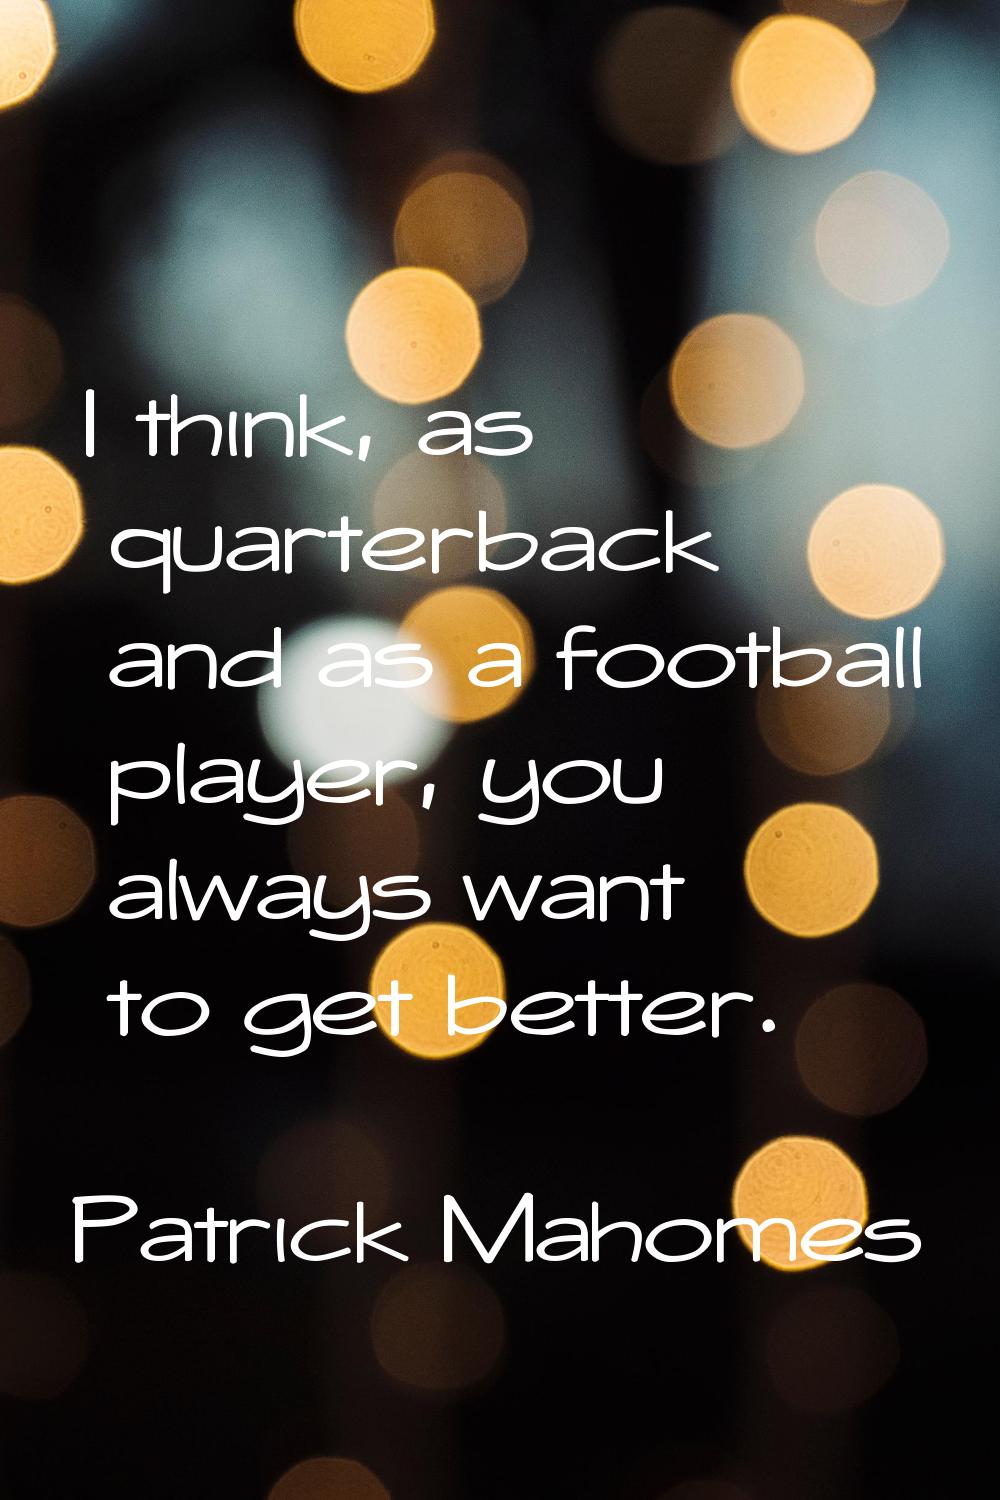 I think, as quarterback and as a football player, you always want to get better.